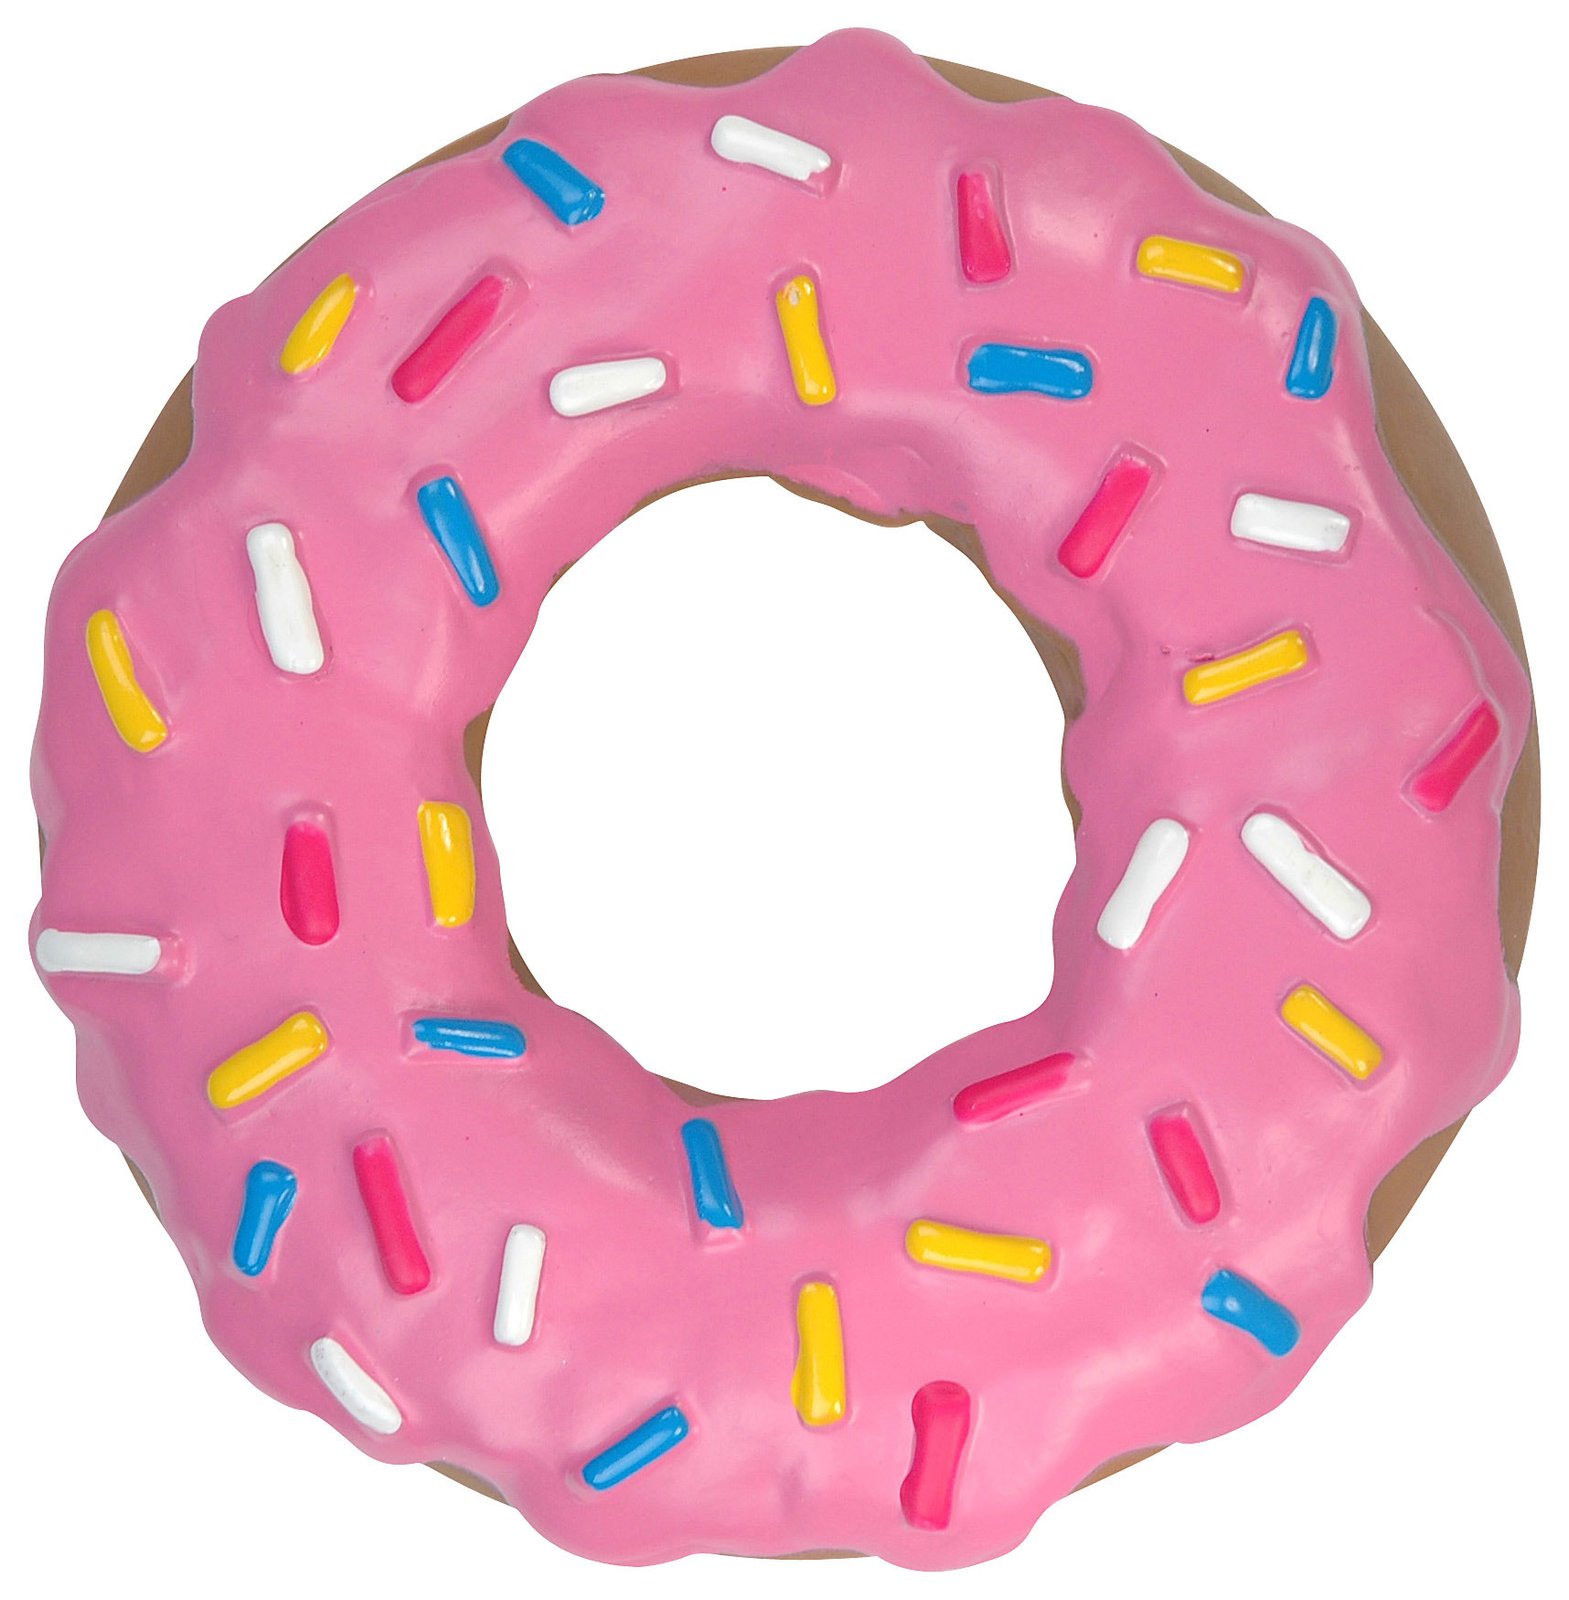 Donut Clip Art. Advertising. You Need To Enable Javascript